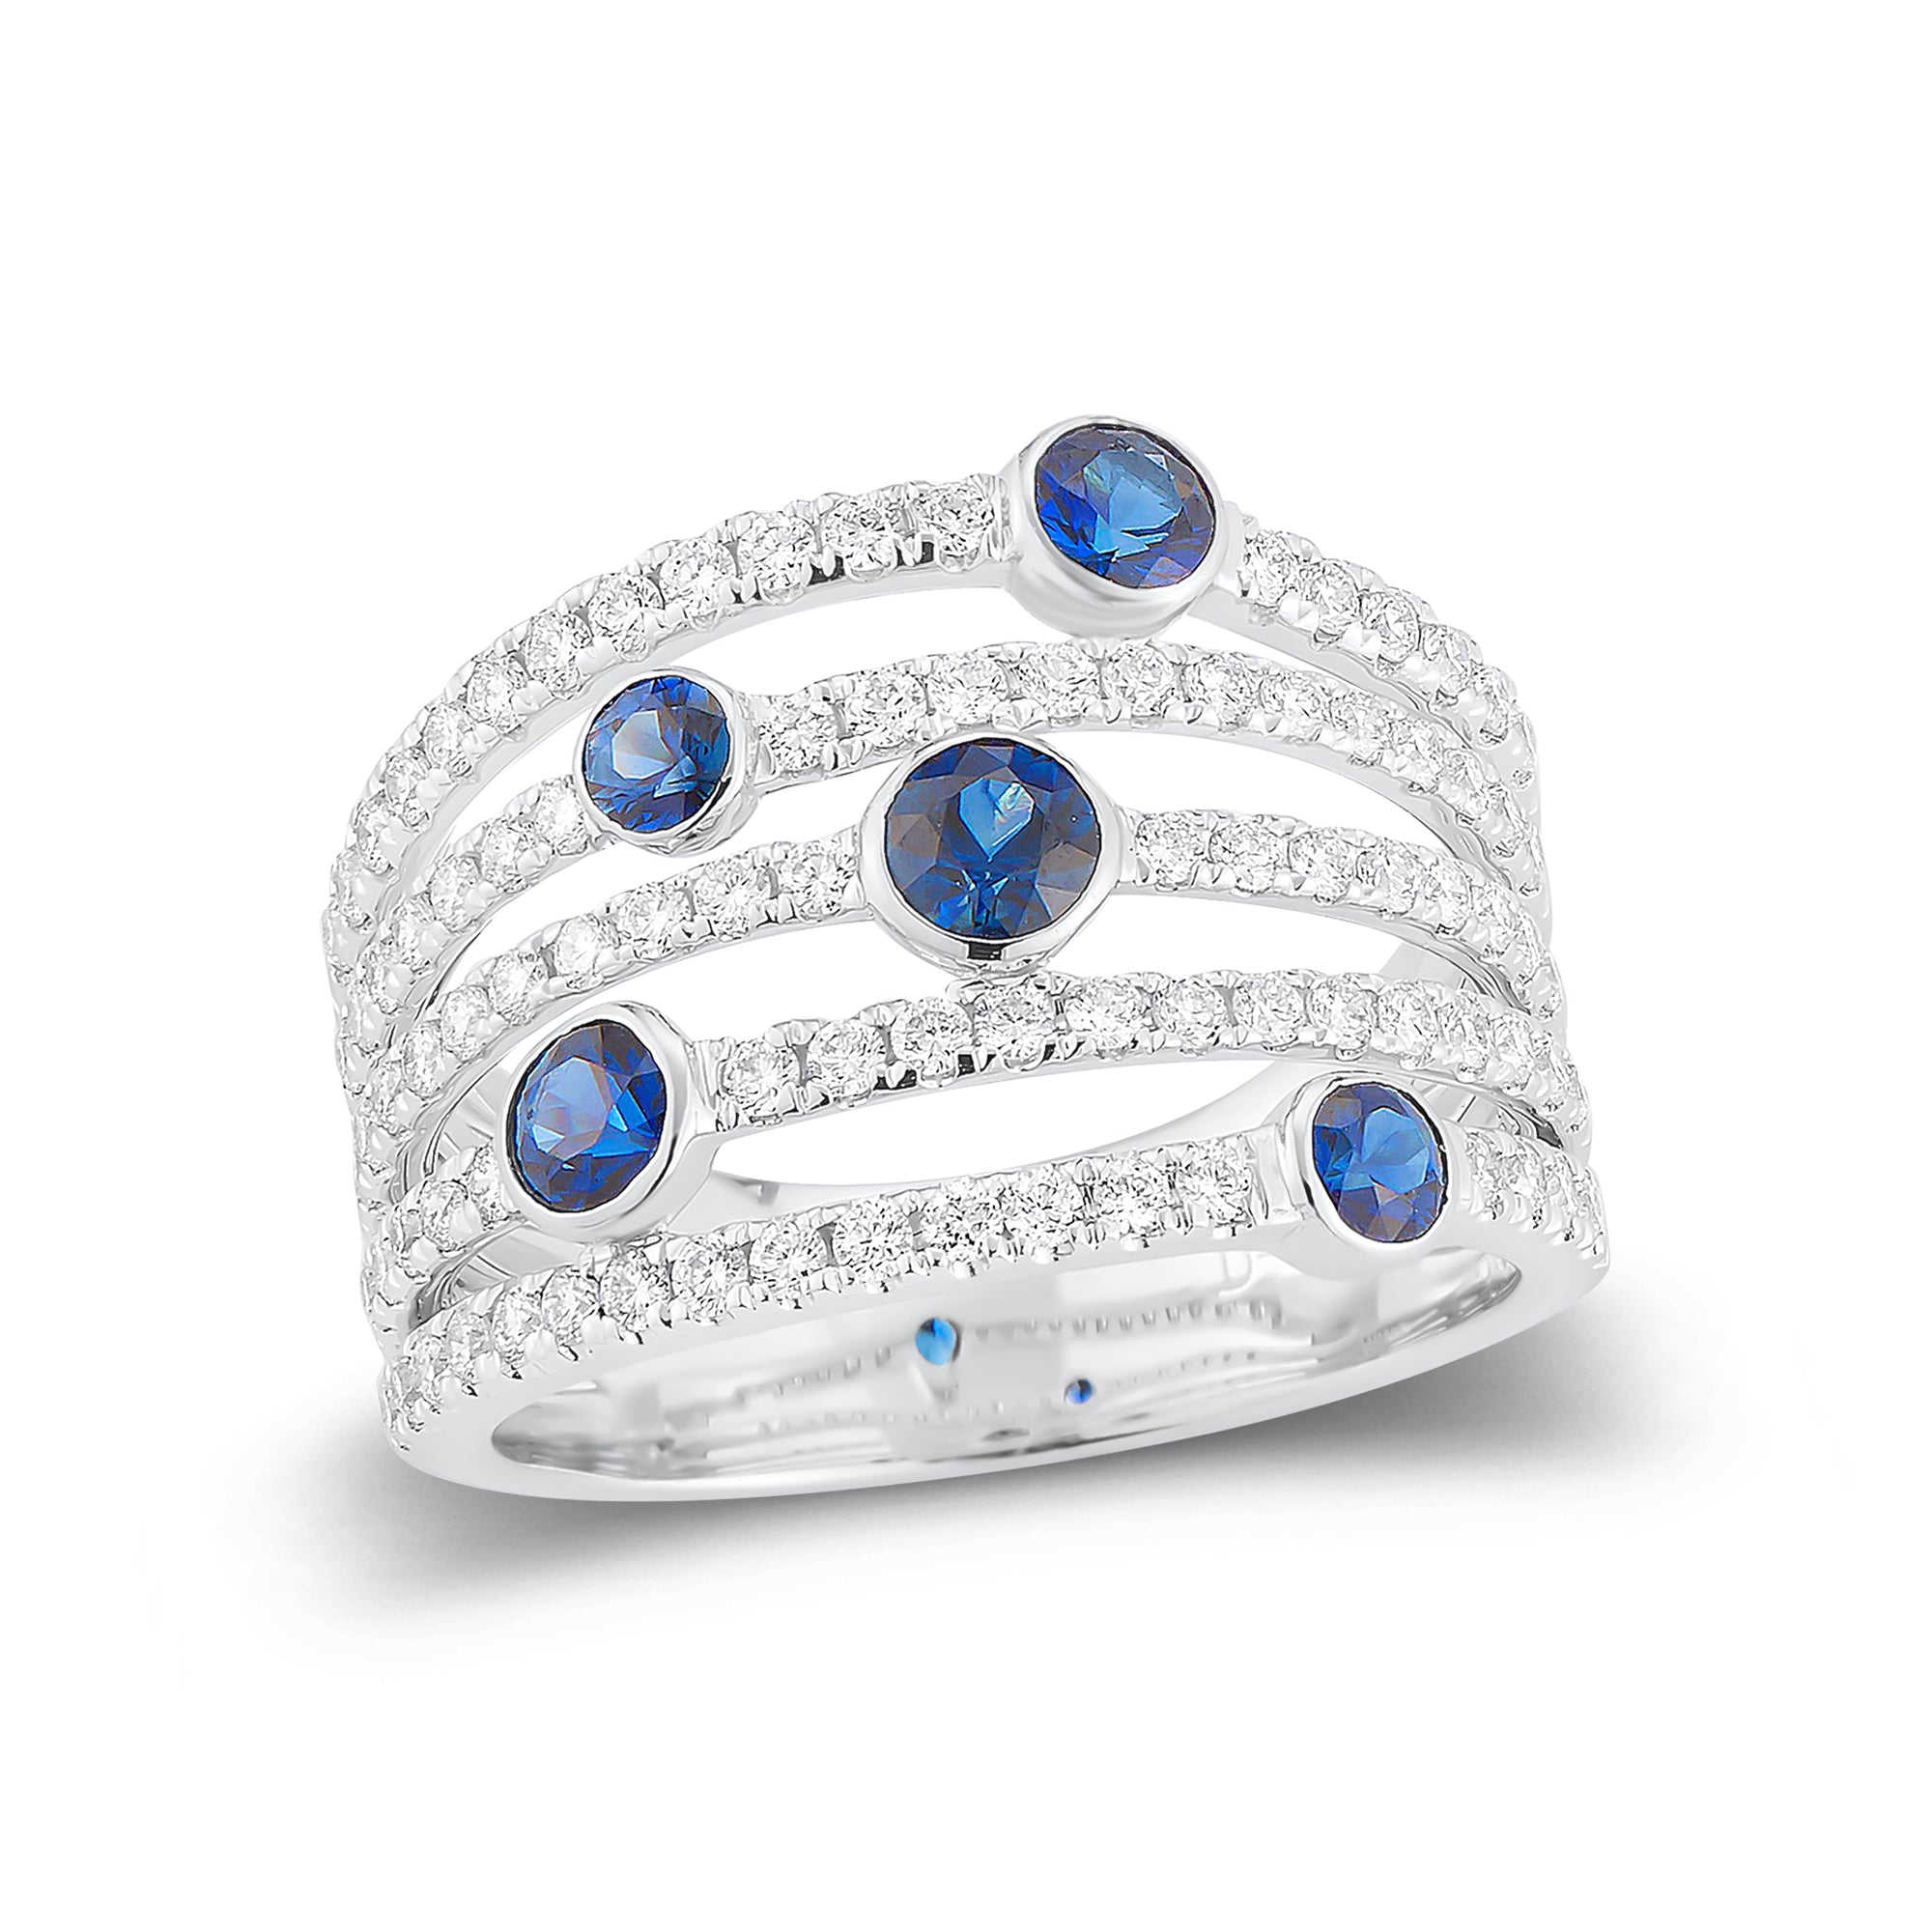 Blue sapphire & diamond multi-row band -18k gold weighing 5.97 grams  -5 round bezel-set sapphires totaling .78 carats  -91 round shared prong-set diamonds totaling .84 carats